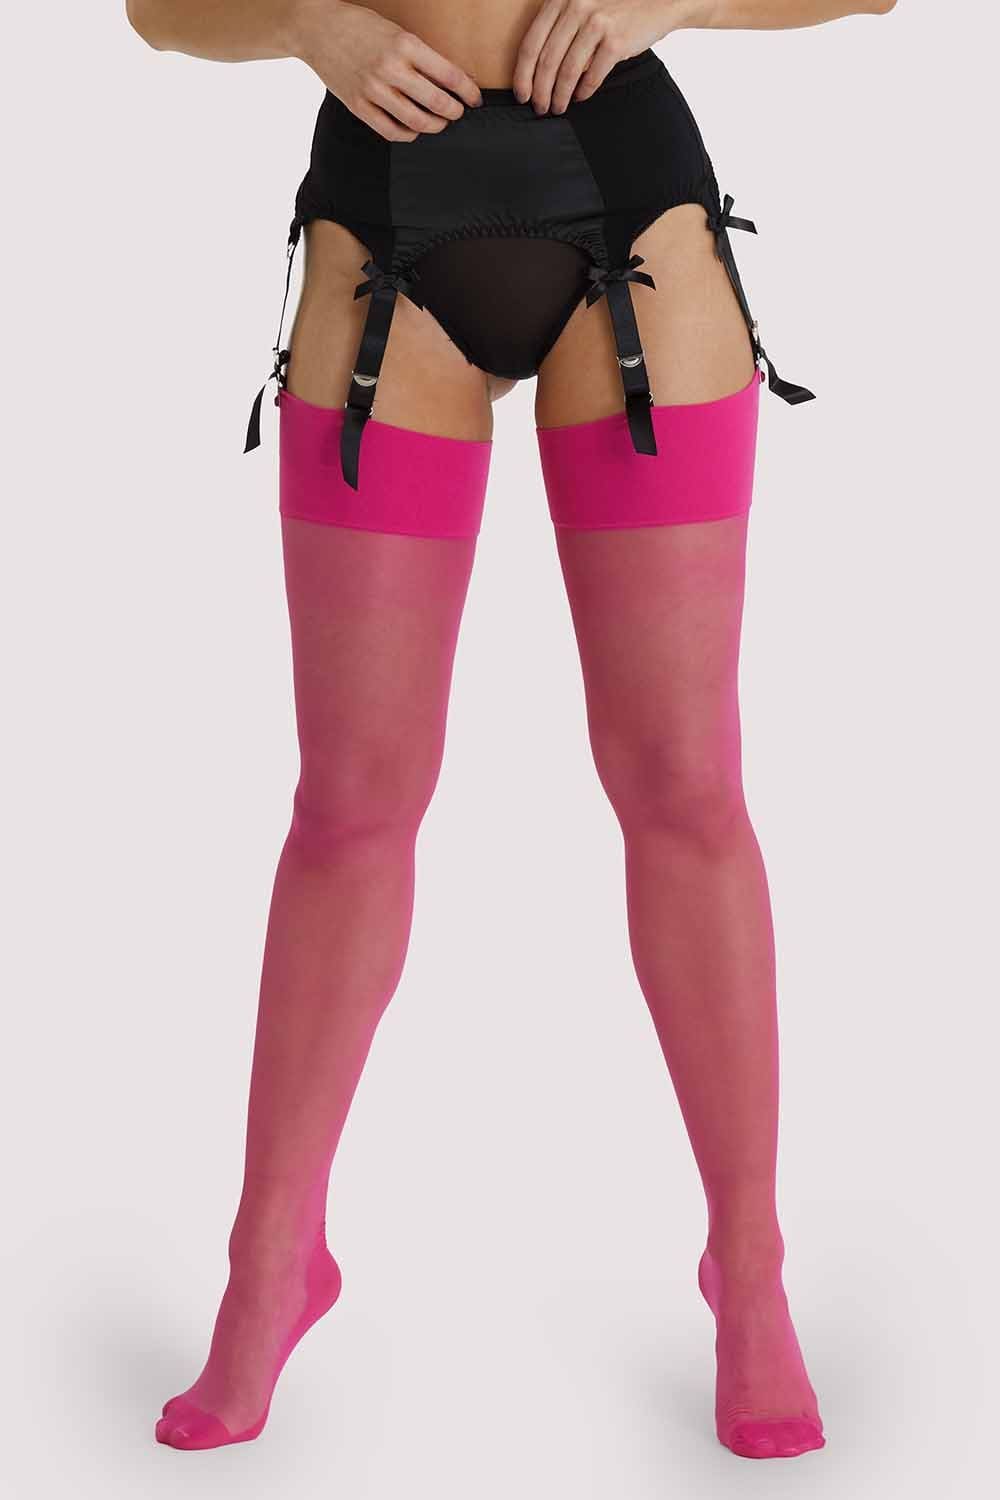 Pink Peacock Seamed Stockings